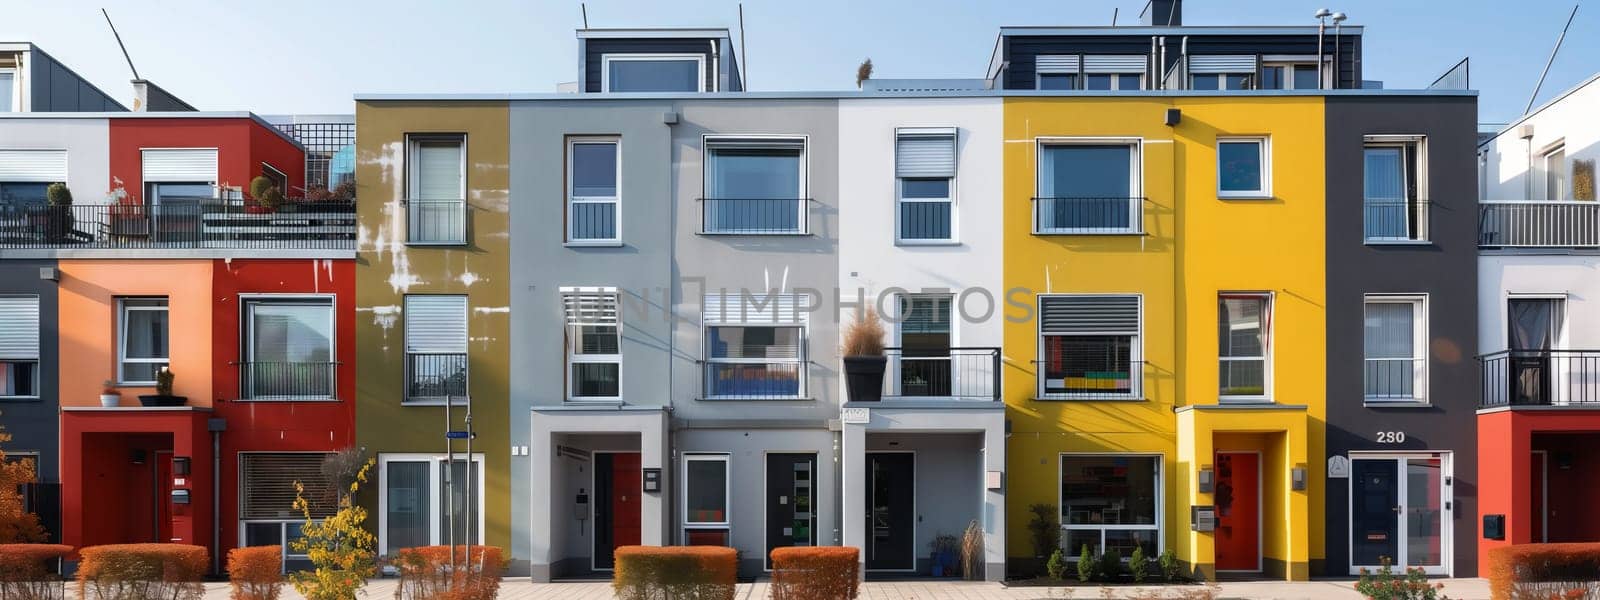 Colorful houses in a row with unique facades and fixtures by richwolf